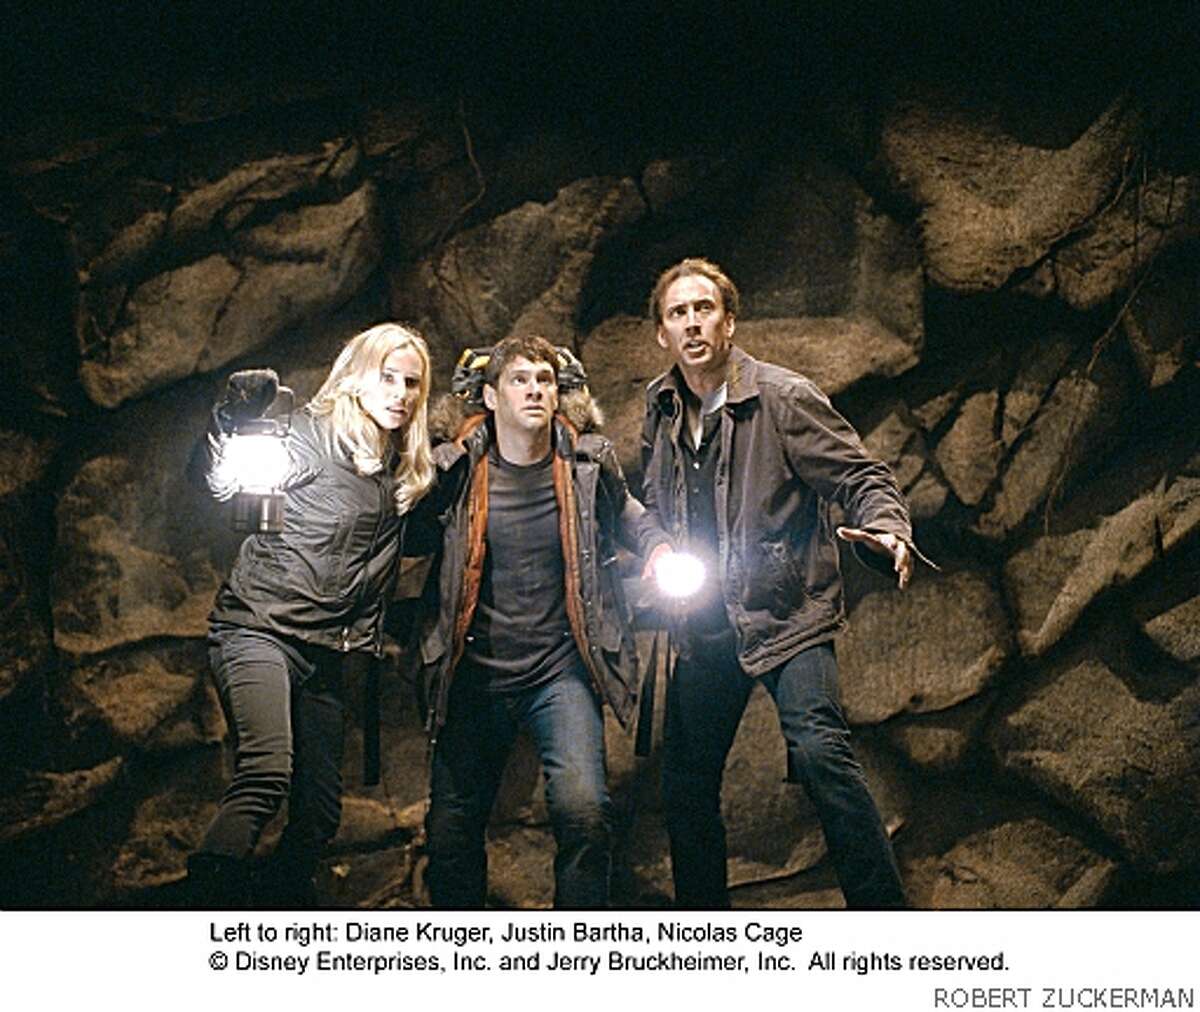 "NATIONAL TREASURE: THE BOOK OF SECRETS"PH:ROBERT ZUCKERMAN© 2007 Buena Vista Pictures and JERRY BRUCKHEIMER, Inc. All rights reserved.Ran on: 12-21-2007Diane Kruger, Justin Bartha and Nicolas Cage in National Treasure: Book of Secrets.Ran on: 12-29-2007Carol Anderson (right) of Piedmont read two reviews of Enchanted before bringing her sons Henry Bendon, 10, (left) and Isaac Bendon, 6, to see it in San Francisco on Christmas Eve. She's part of the parent-driven success of movies with G and PG ratings.